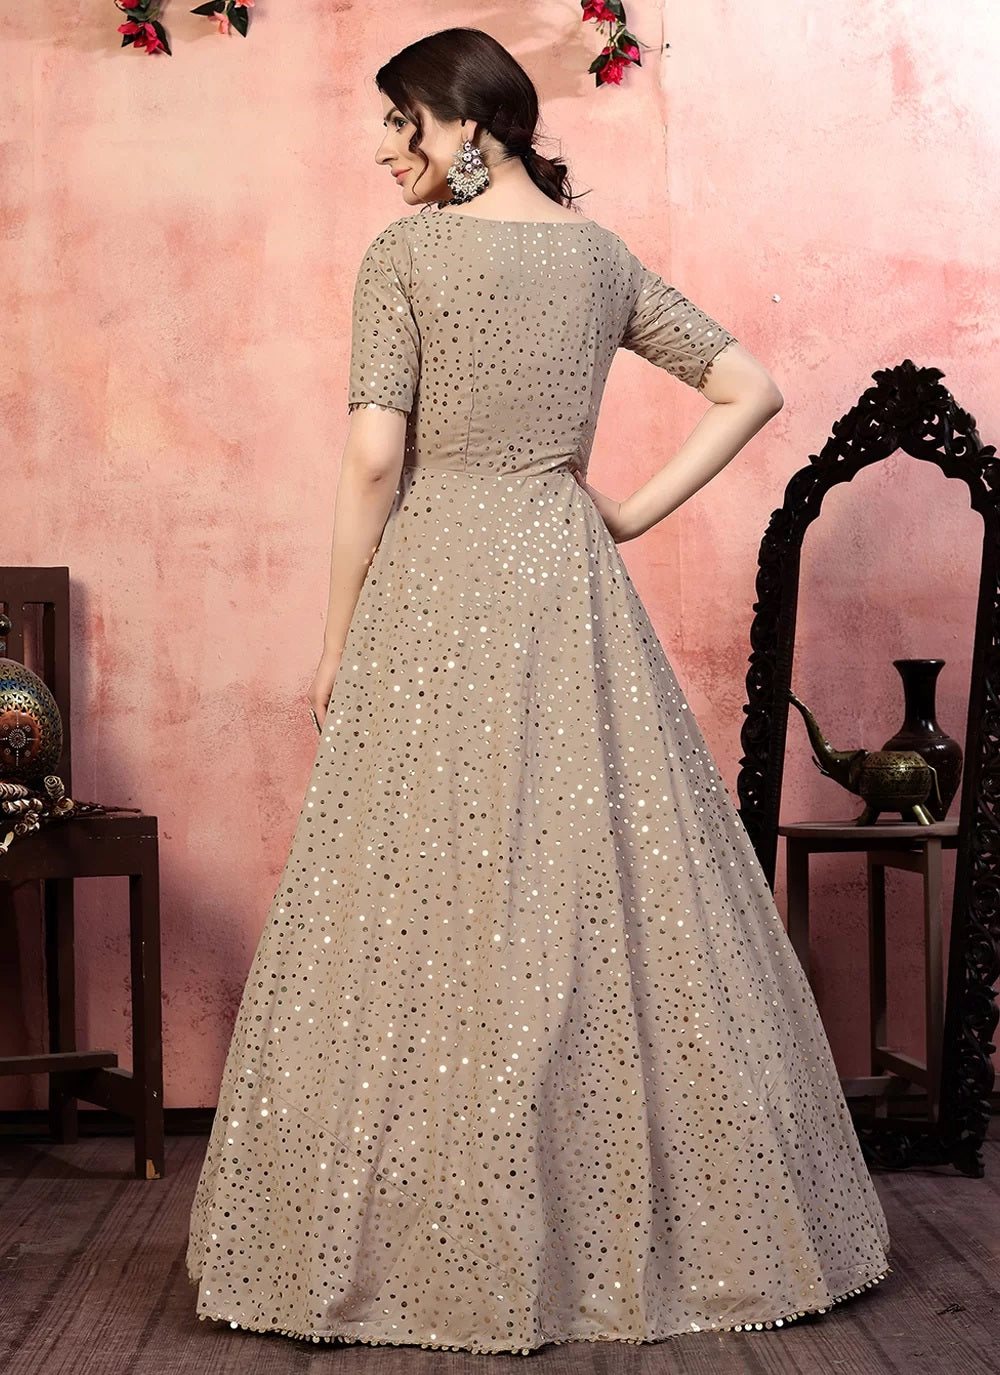 20 Indian Wedding Reception Outfit Ideas for the Bride  Bling Sparkle